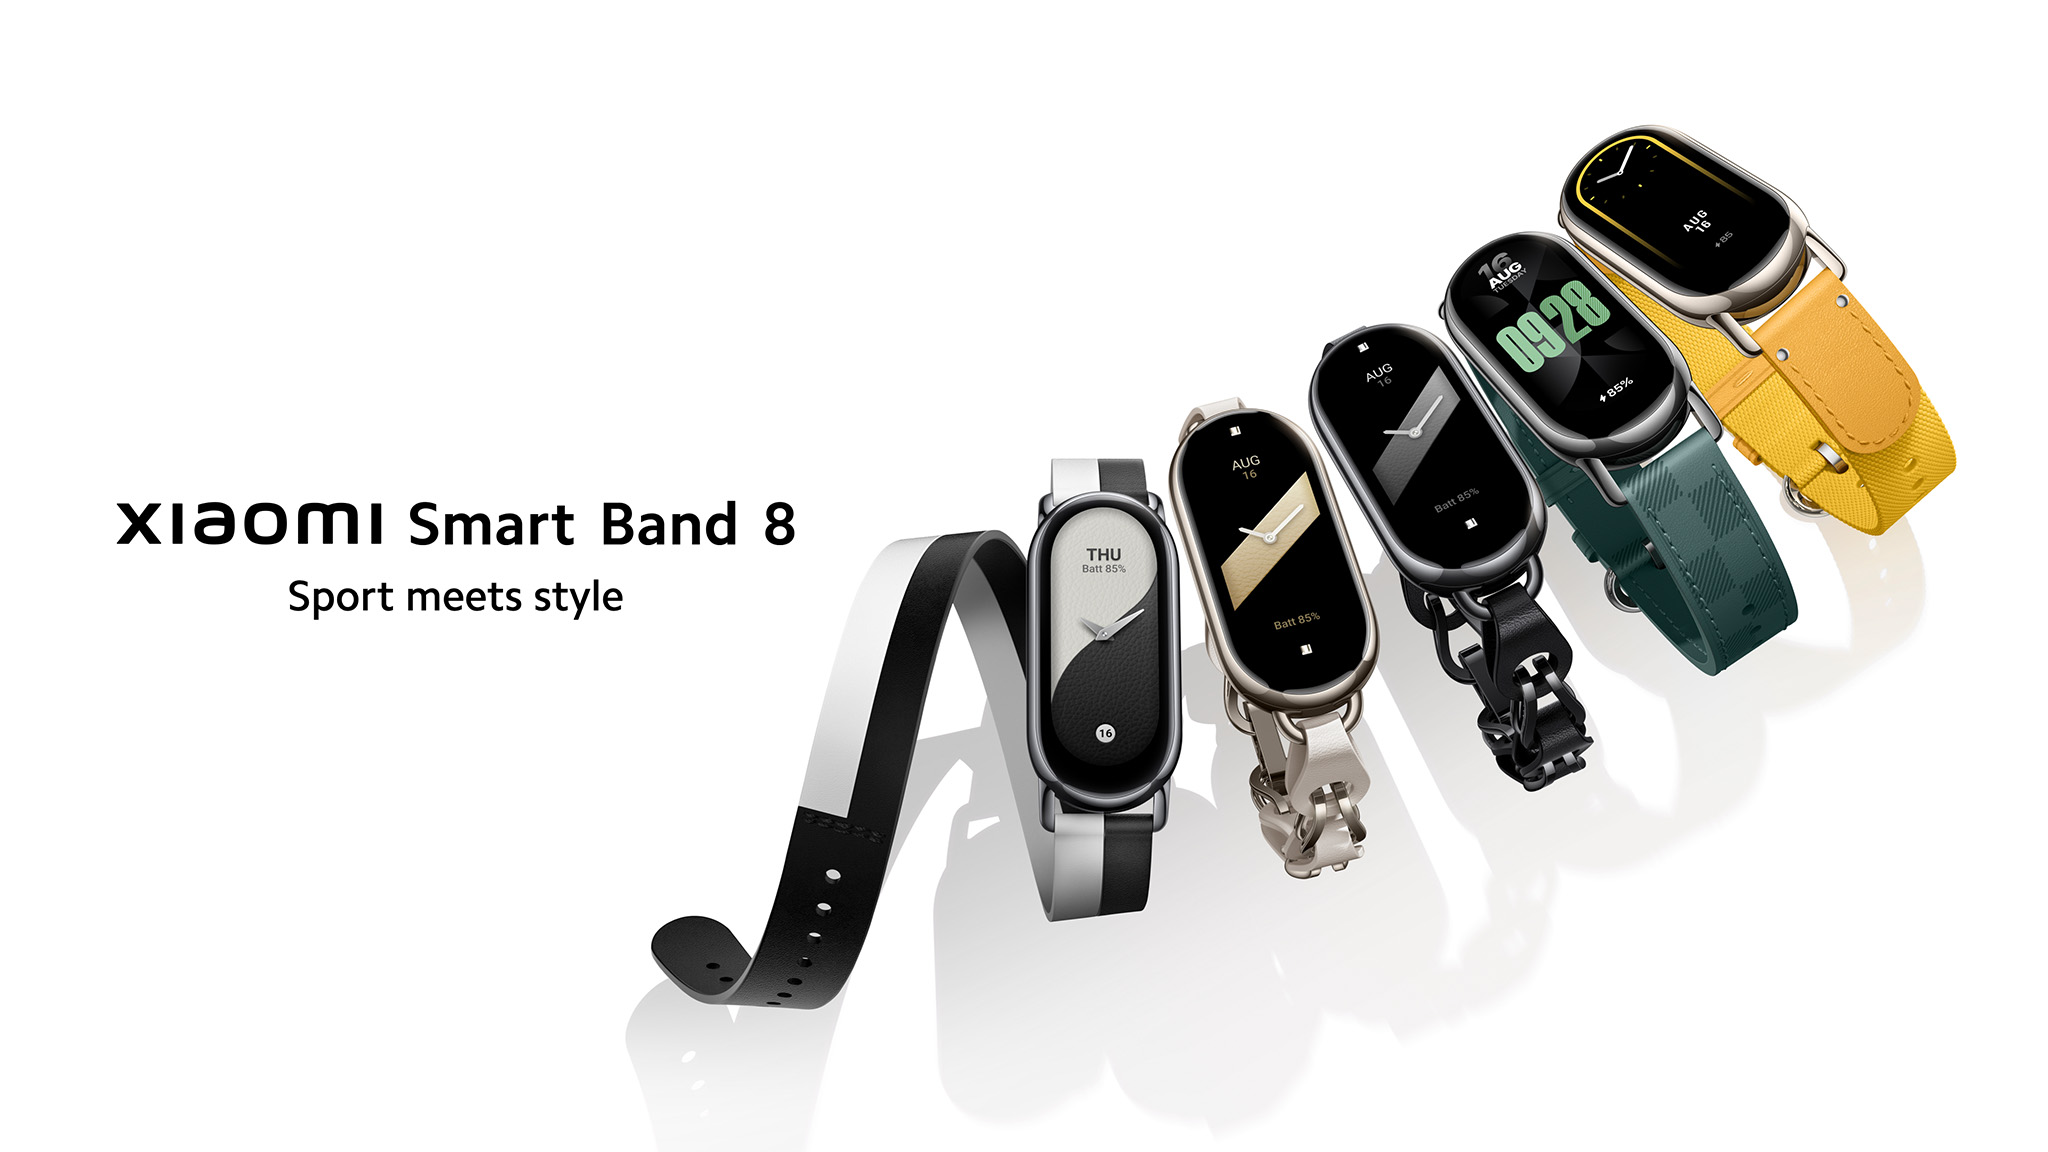 Xiaomi has unveiled Smart Band 8 Pro with large AMOLED display